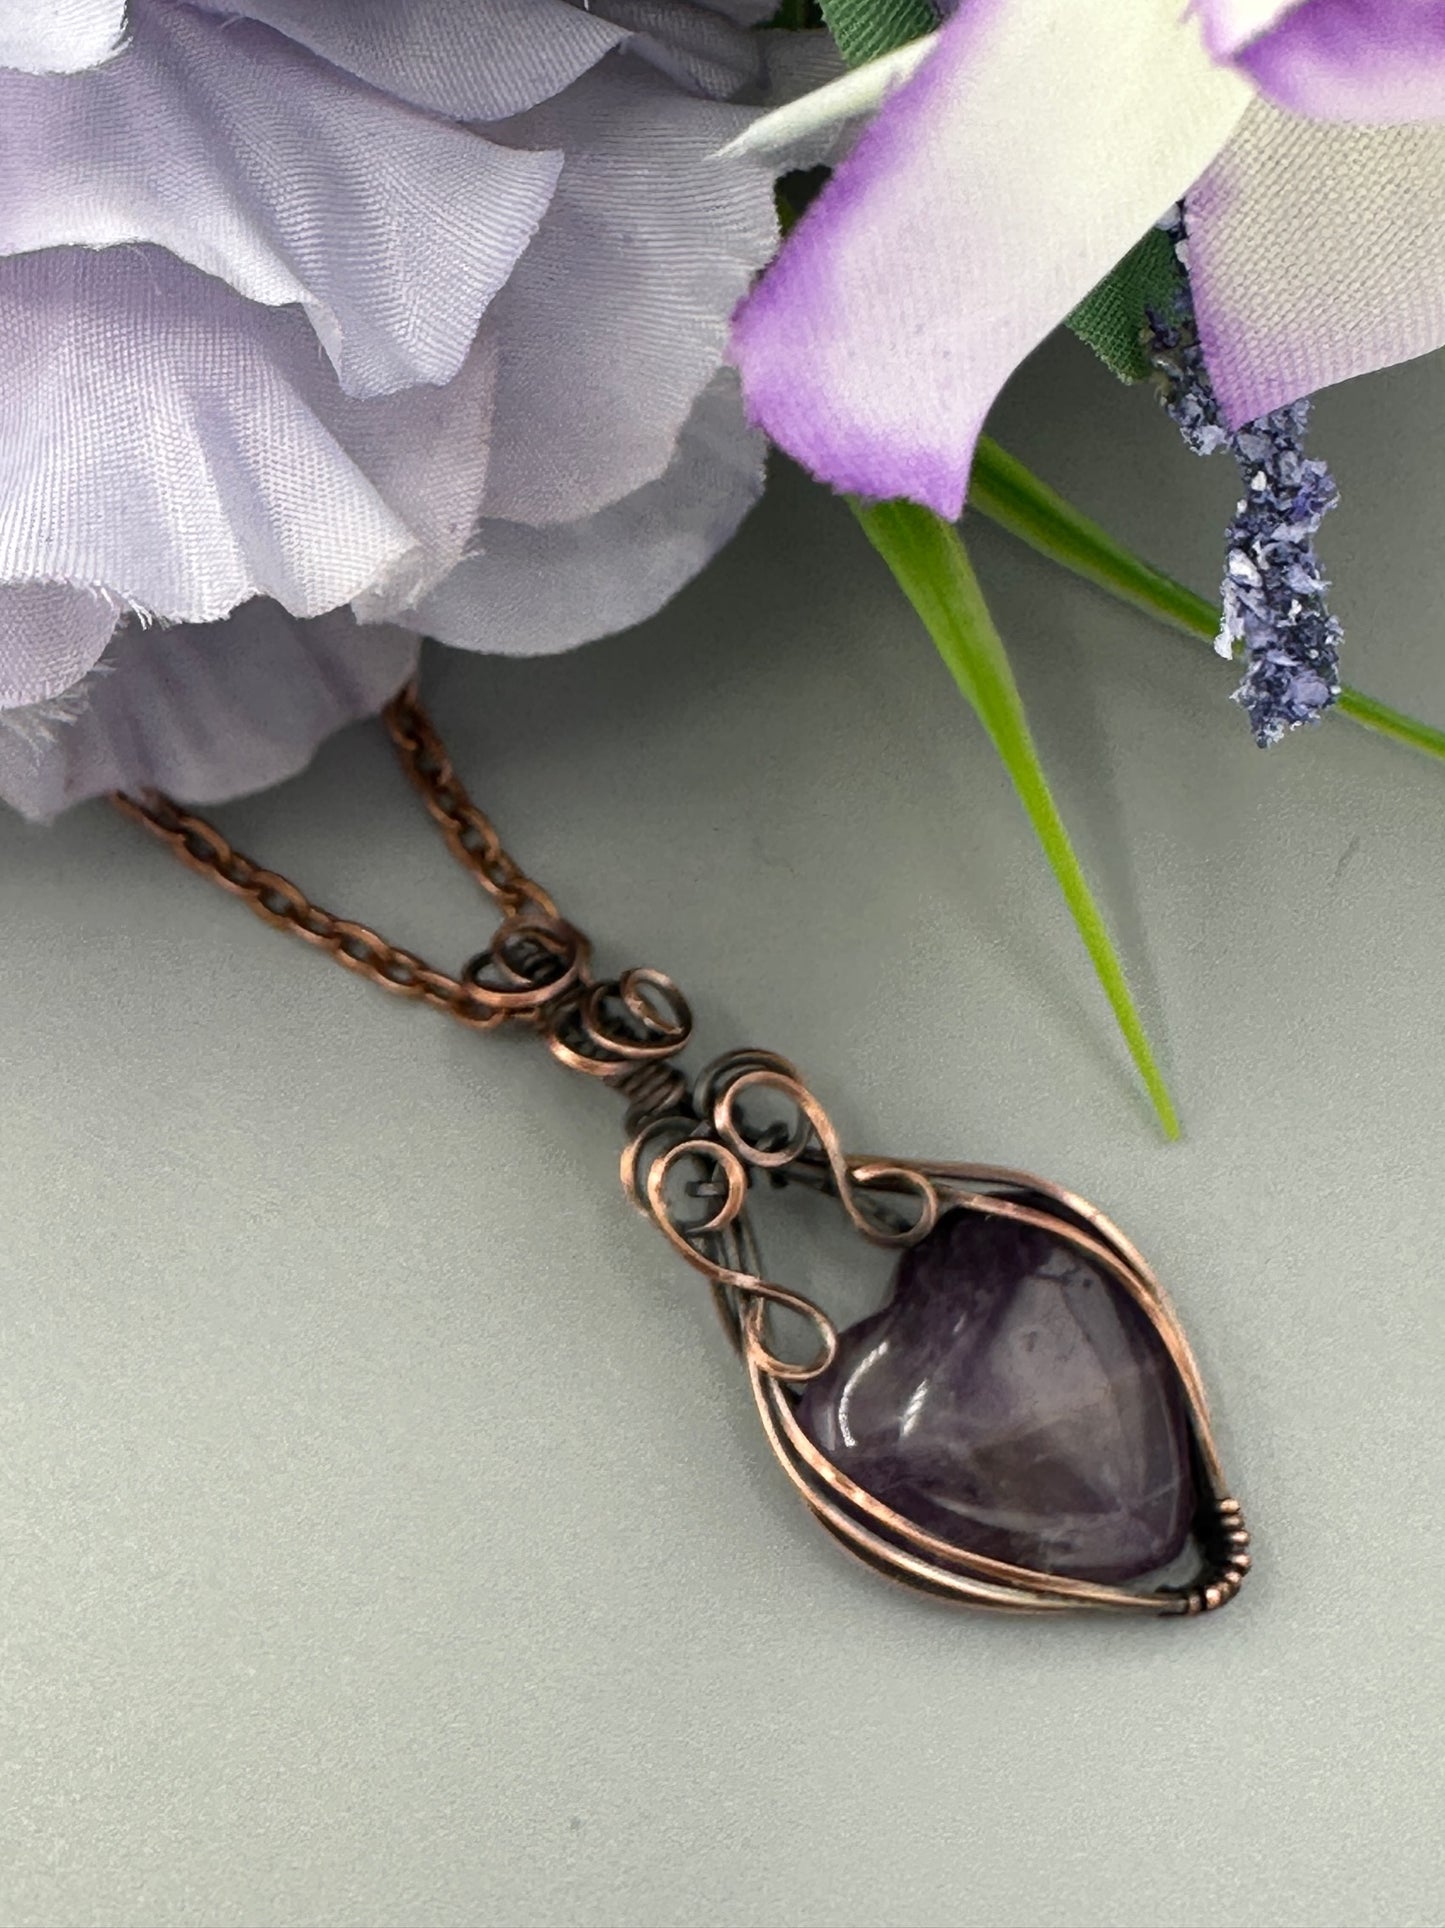 Amethyst Heart Handmade Wire Wrapped Pendant